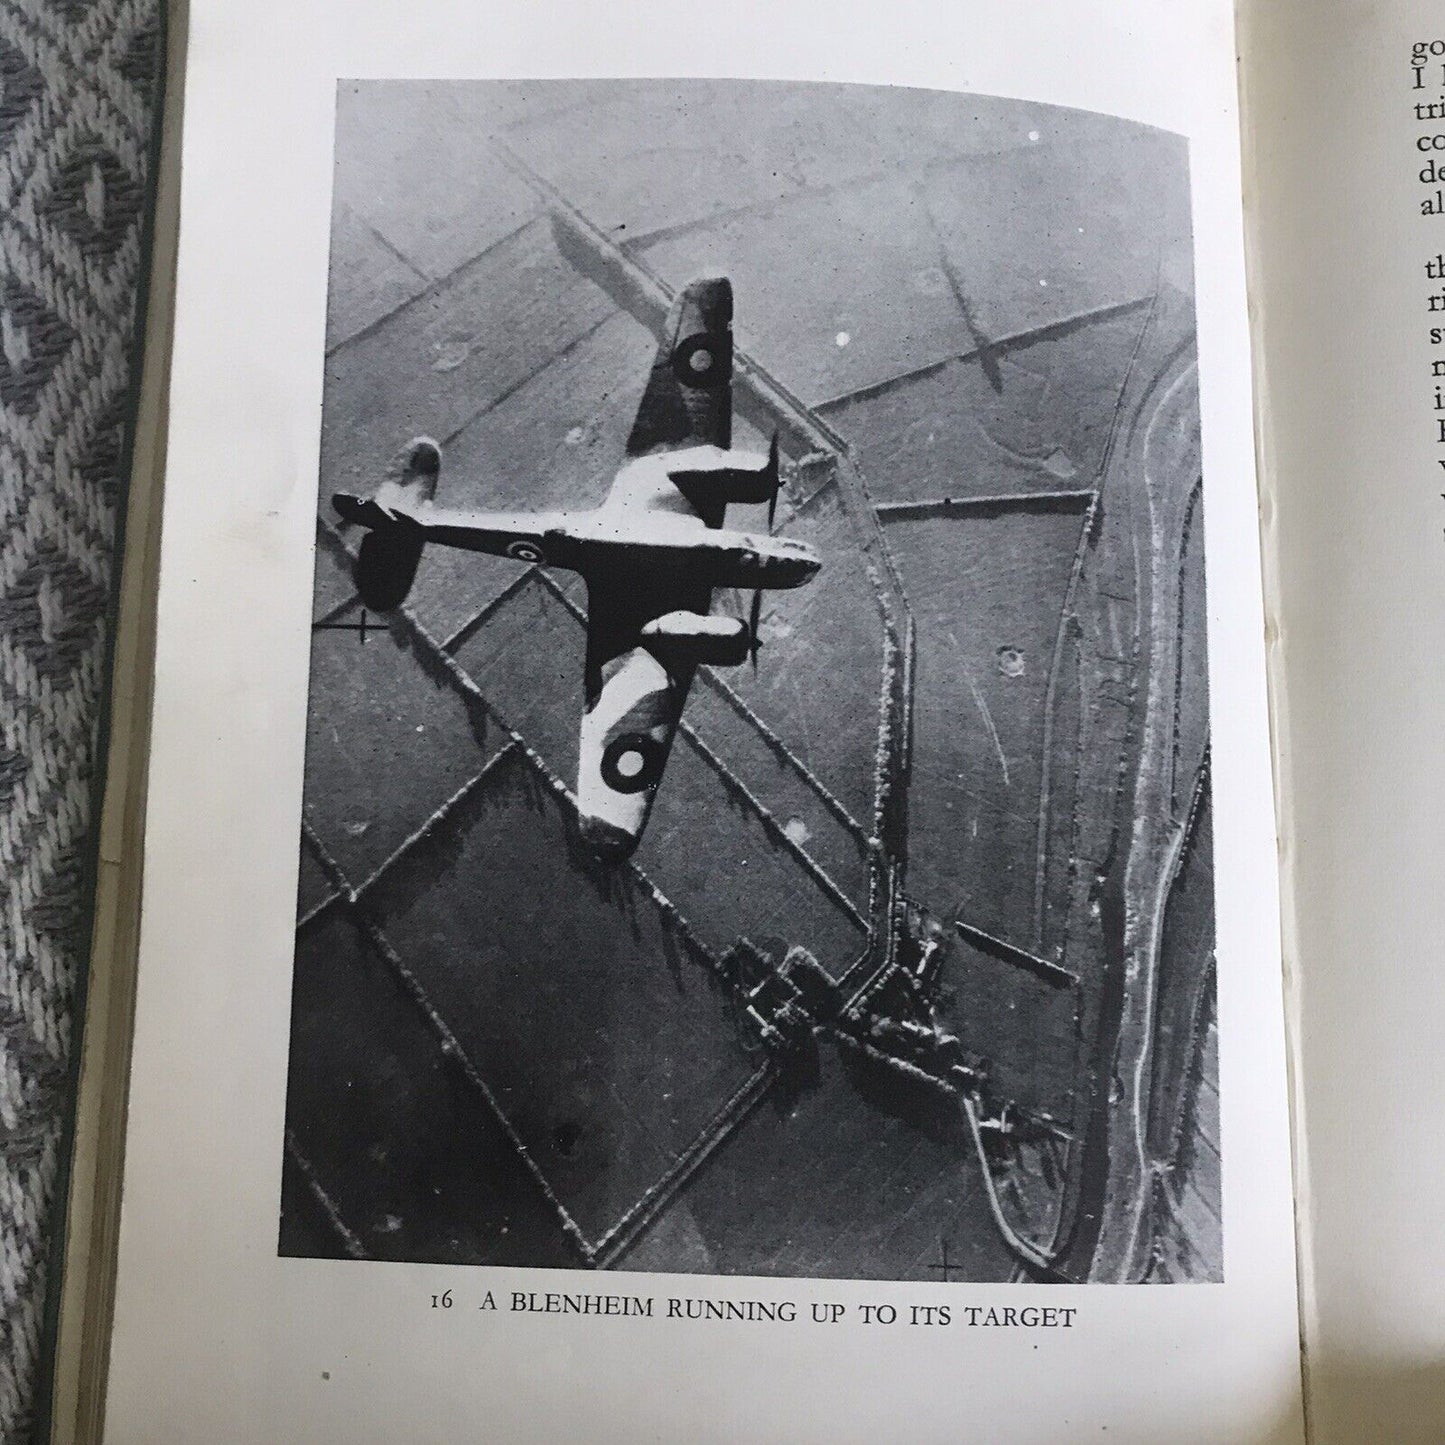 1941 Fighter Pilot A Personal Record Of The Campaign In France 1939-1940 - B. T. Honeyburn Books (UK)